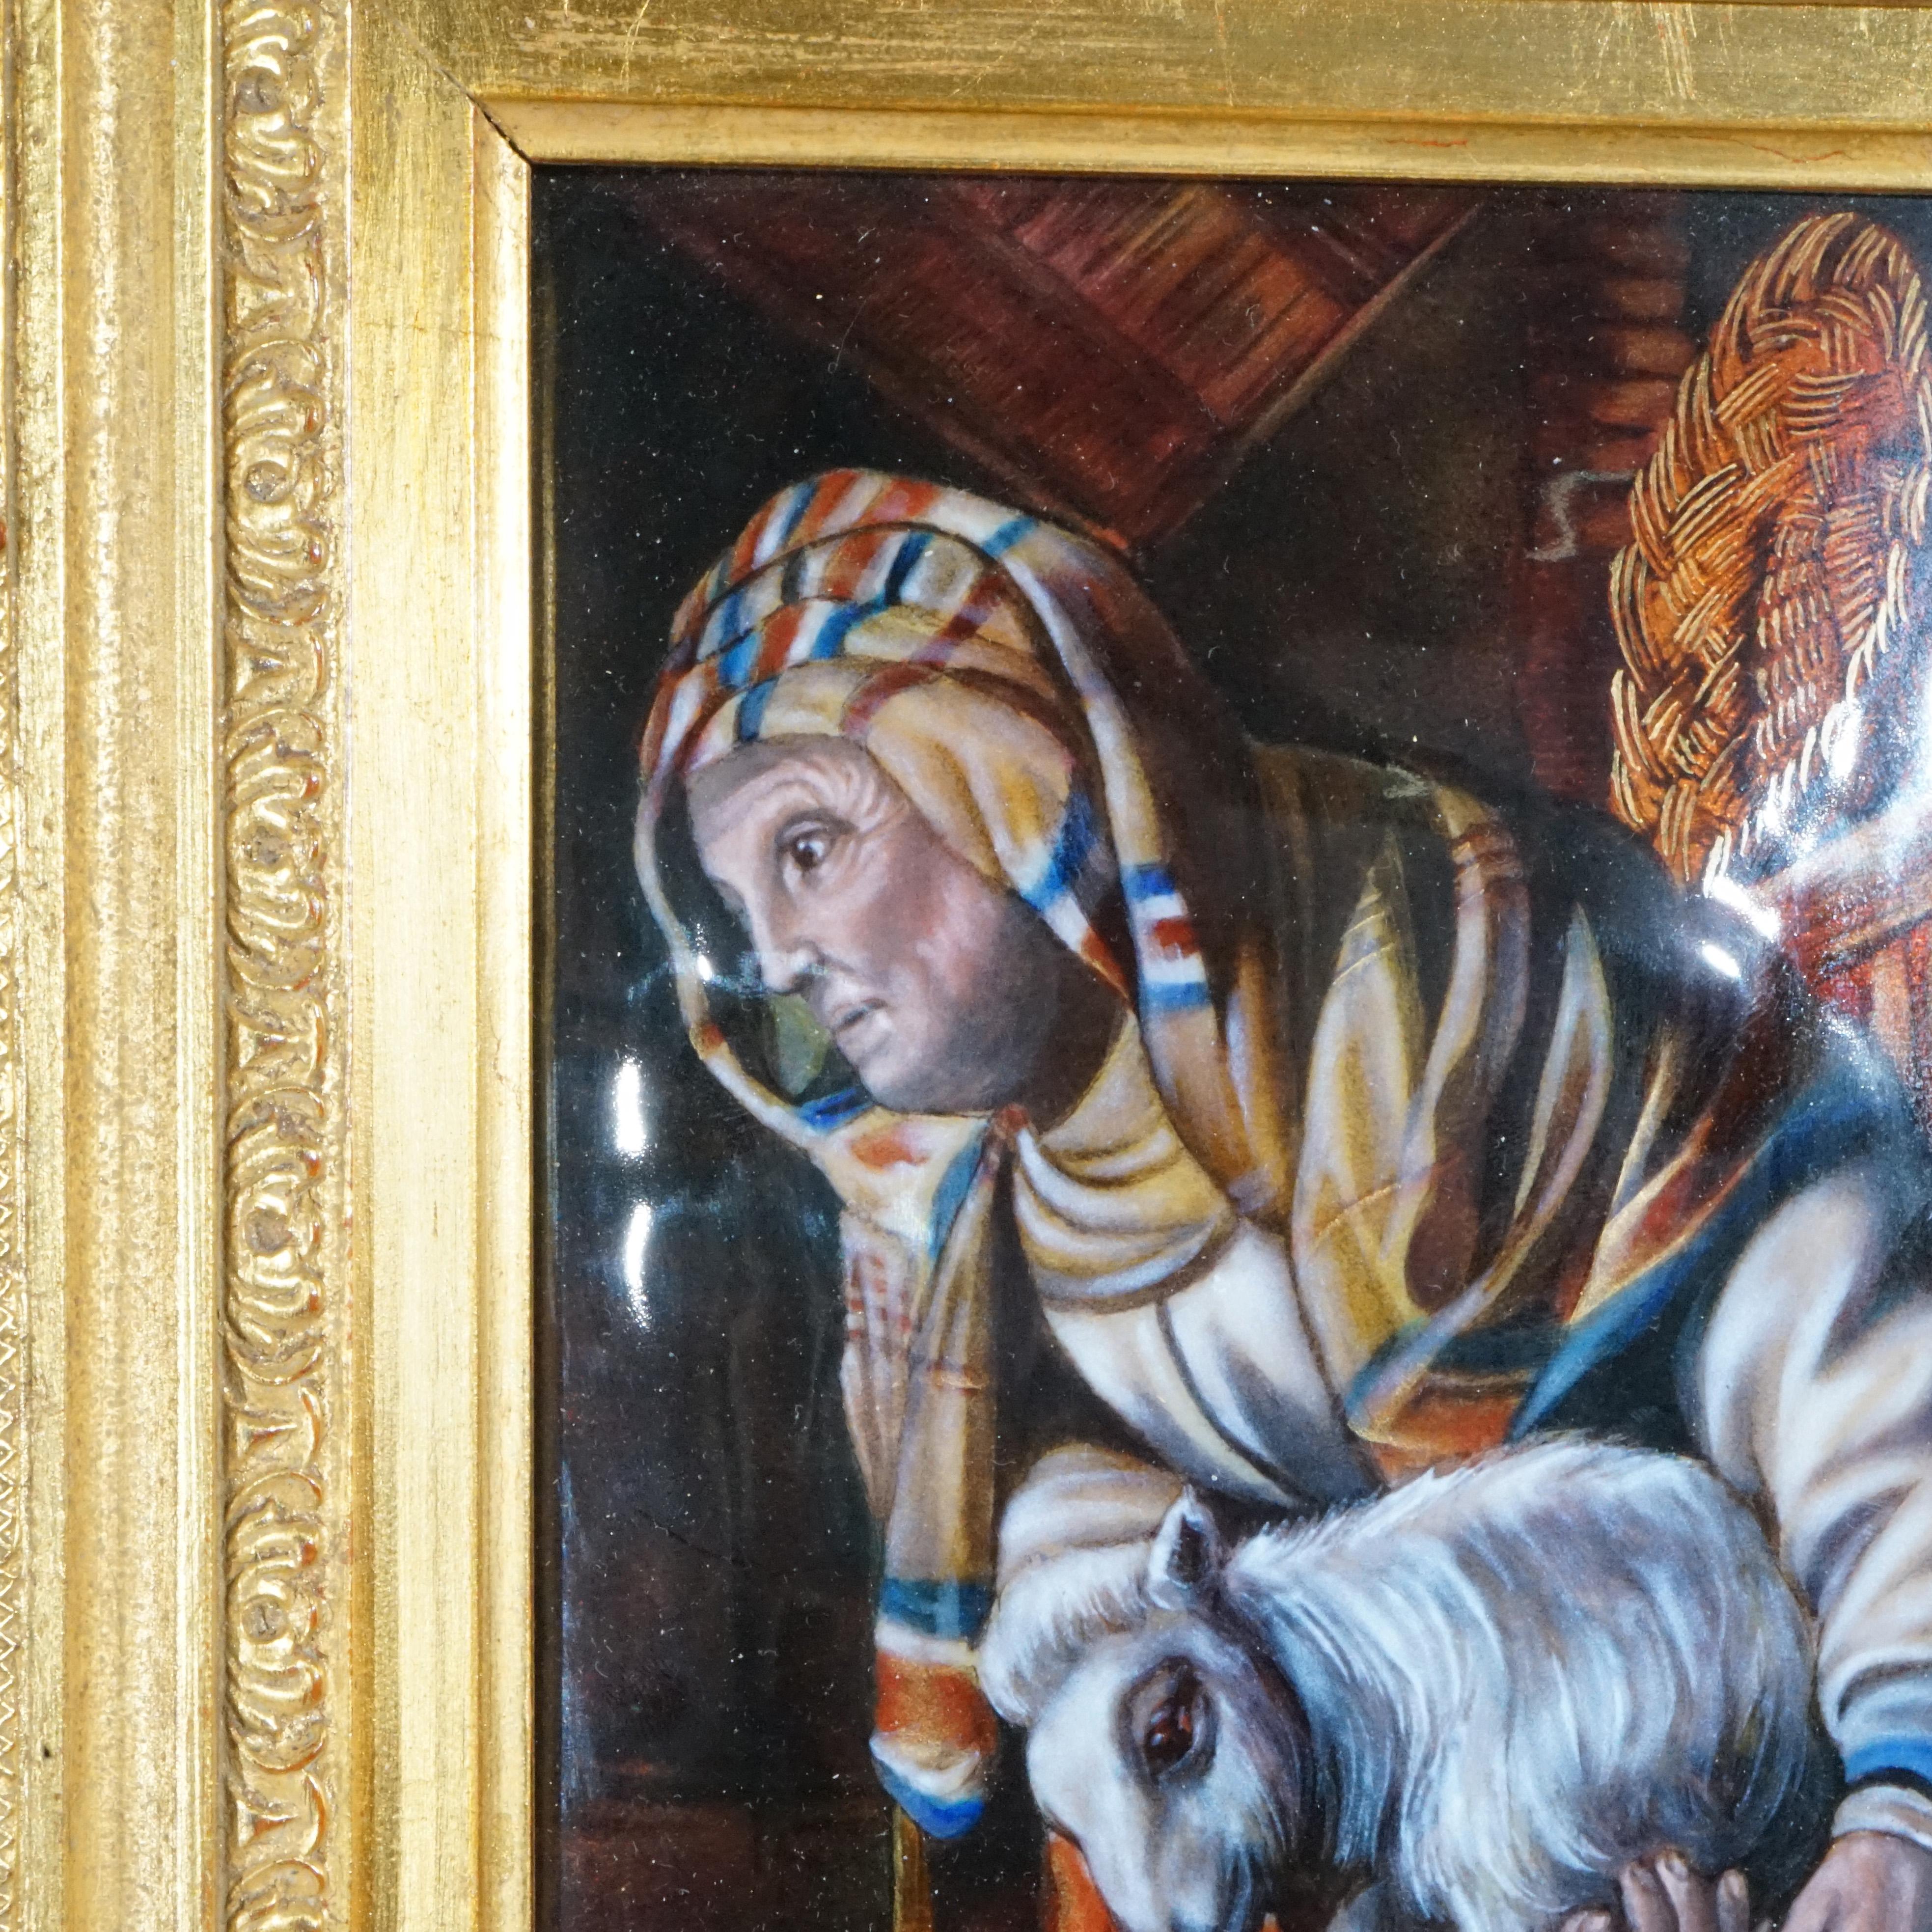 20th Century French Limoges Enamel on Copper Painting with Lamb after Rembrandt, 20th C